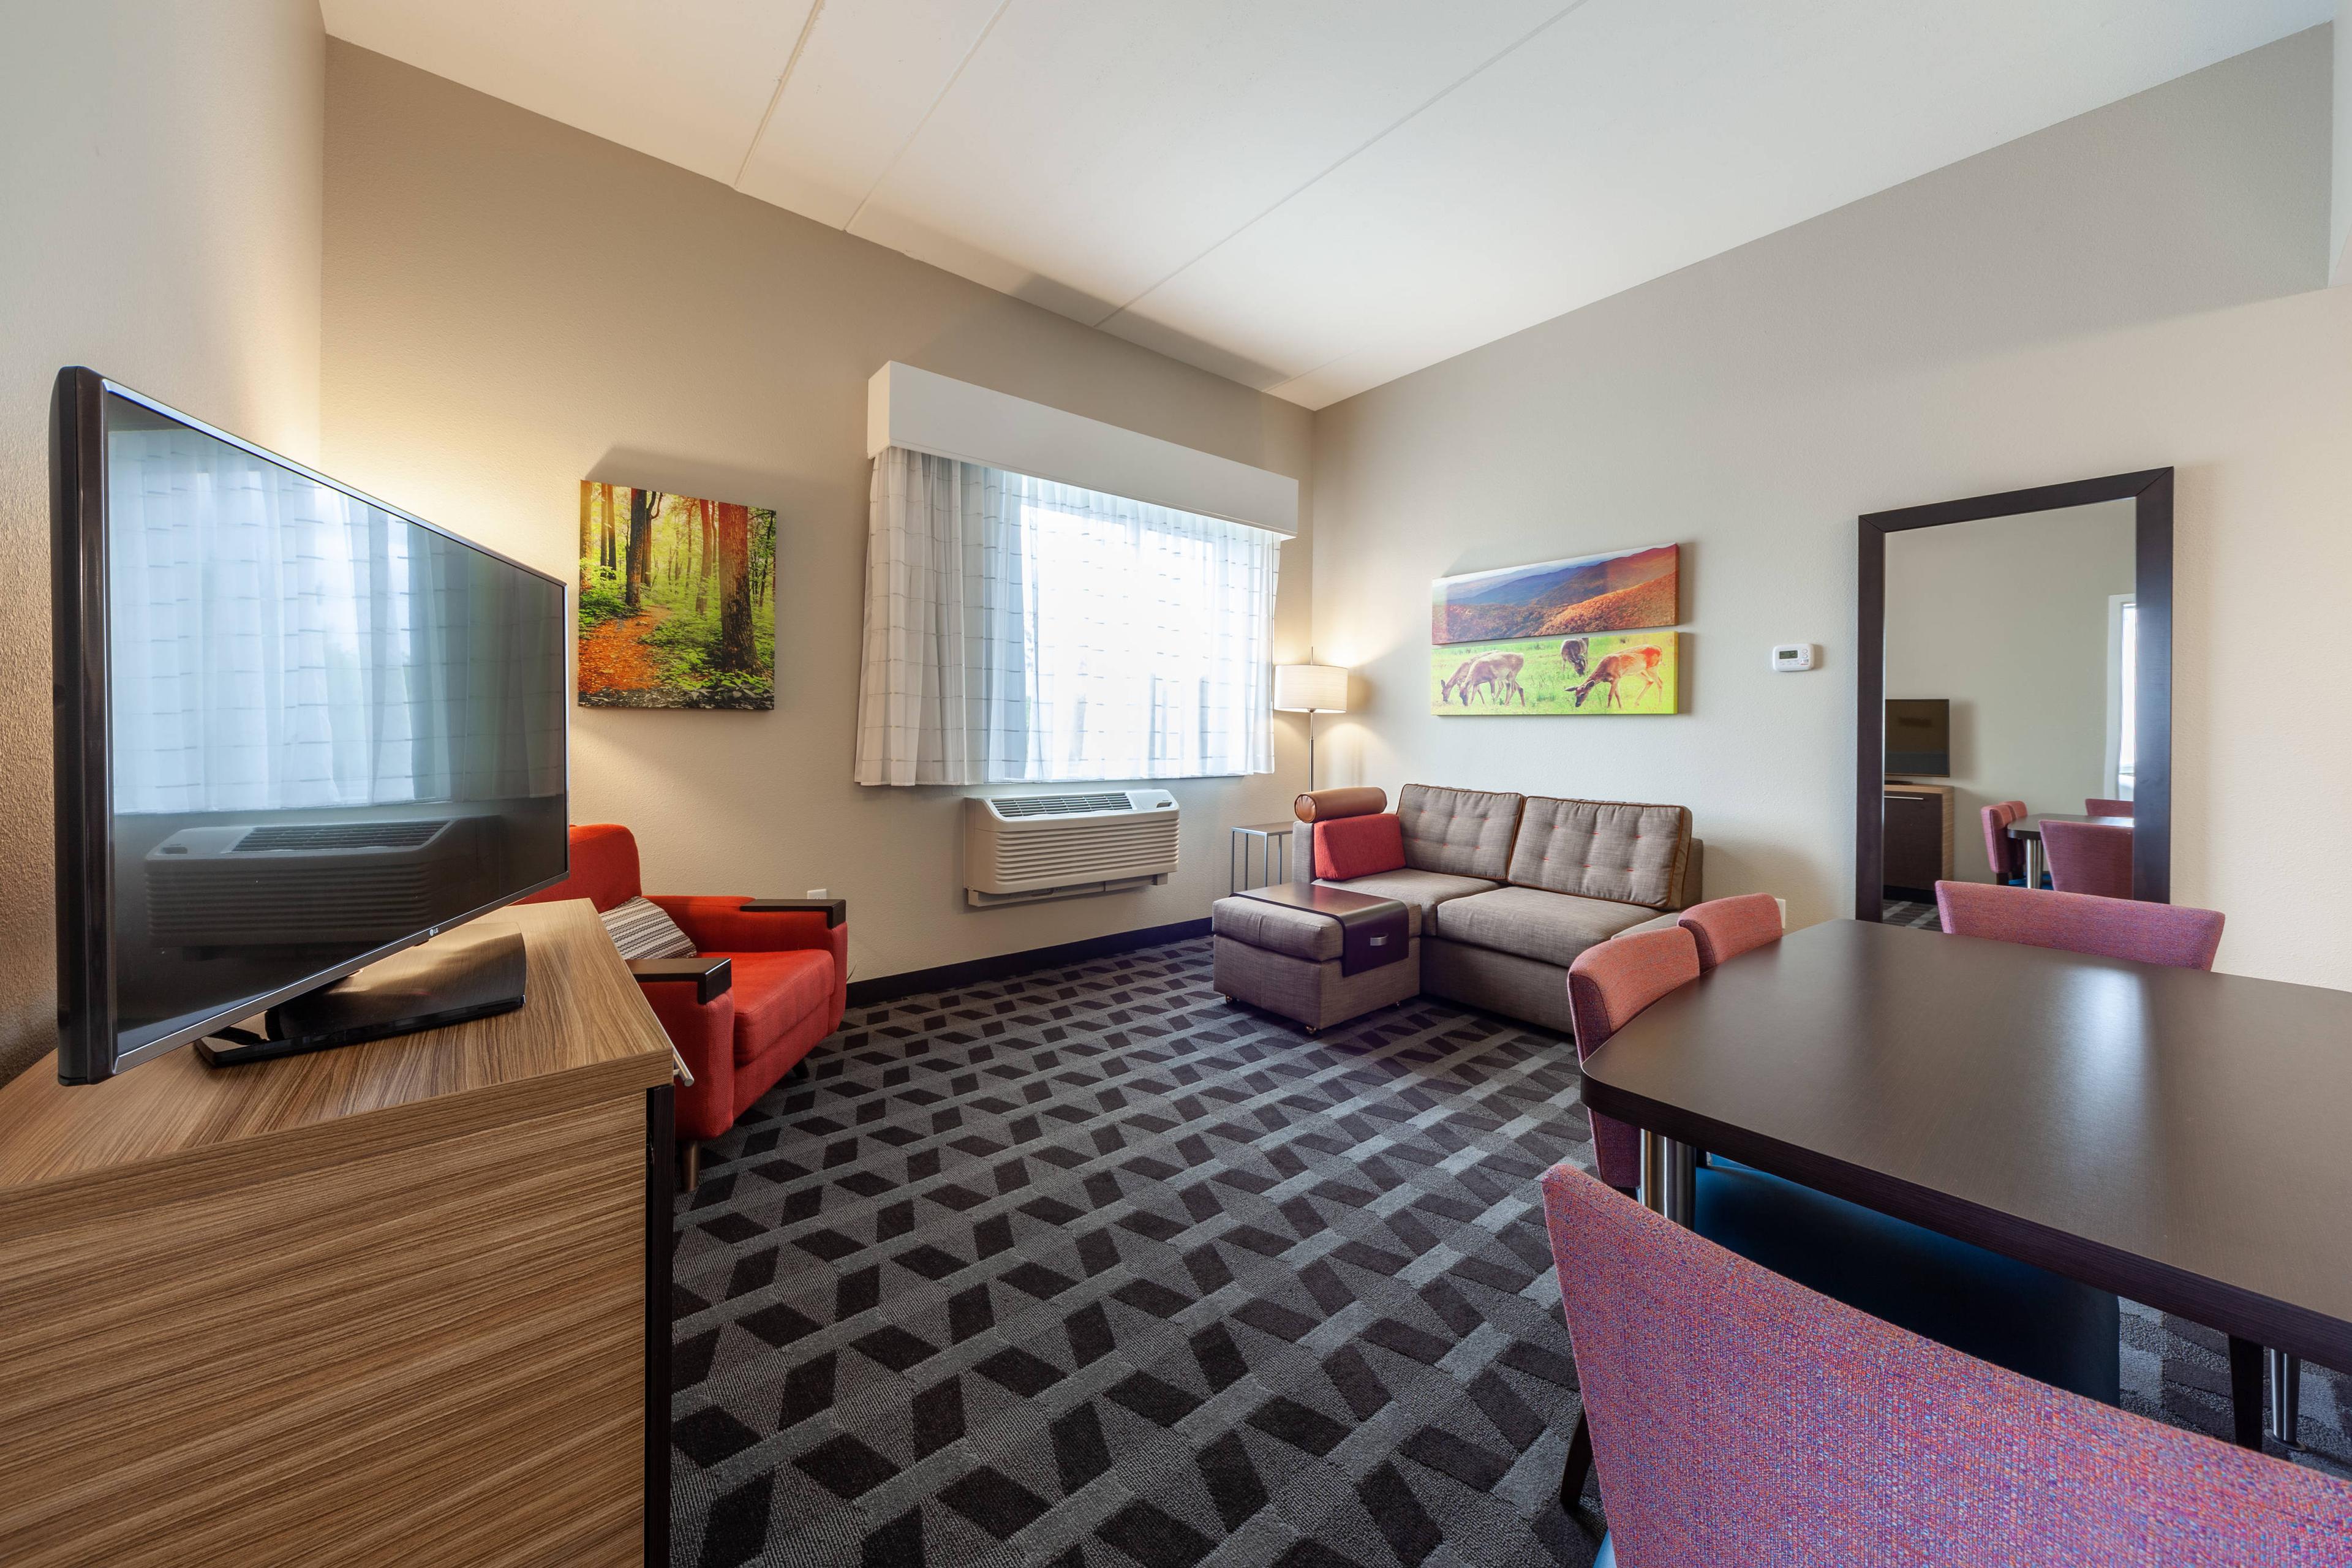 Enjoy the extra space to stretch out and relax in our private living room area.